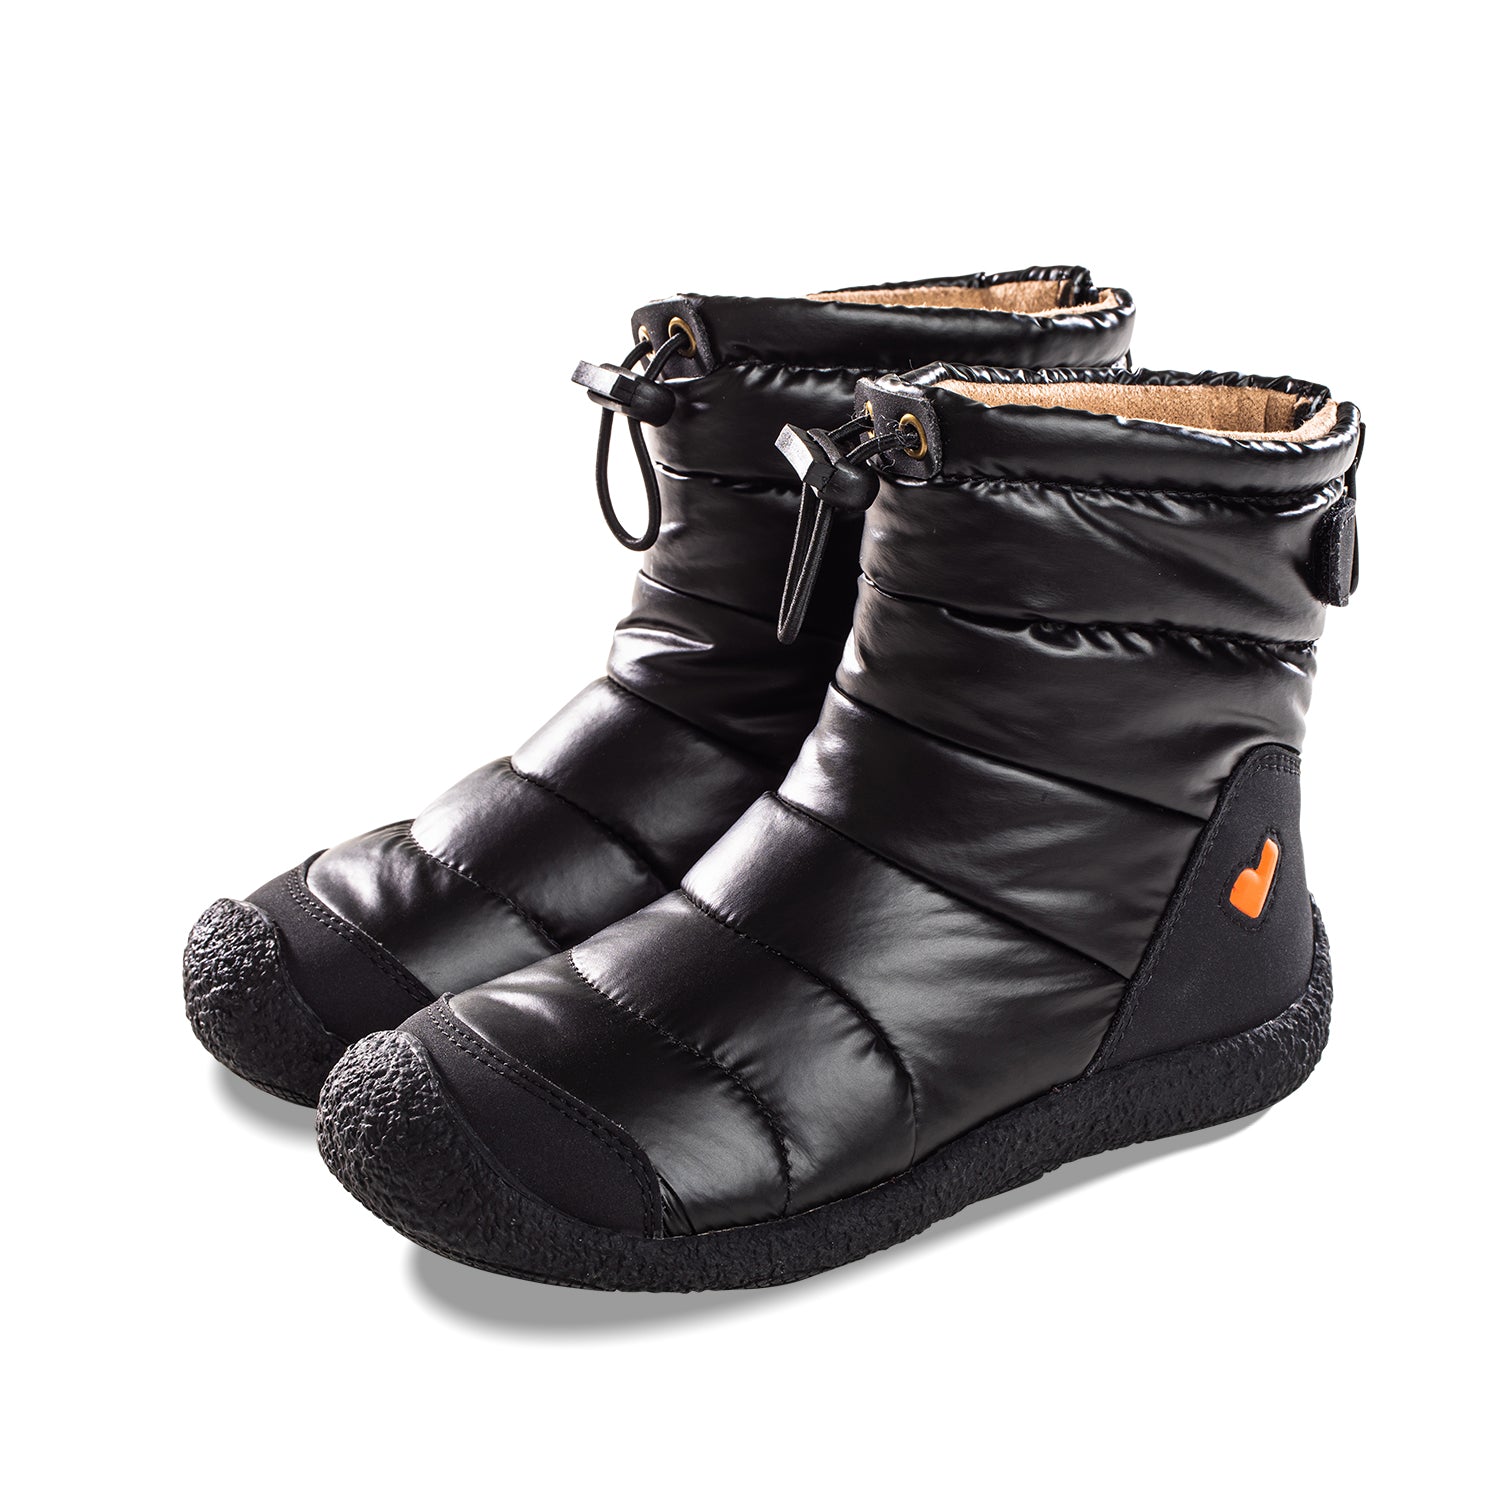 [Ships in 6 weeks] Snow Boots Junior High Black